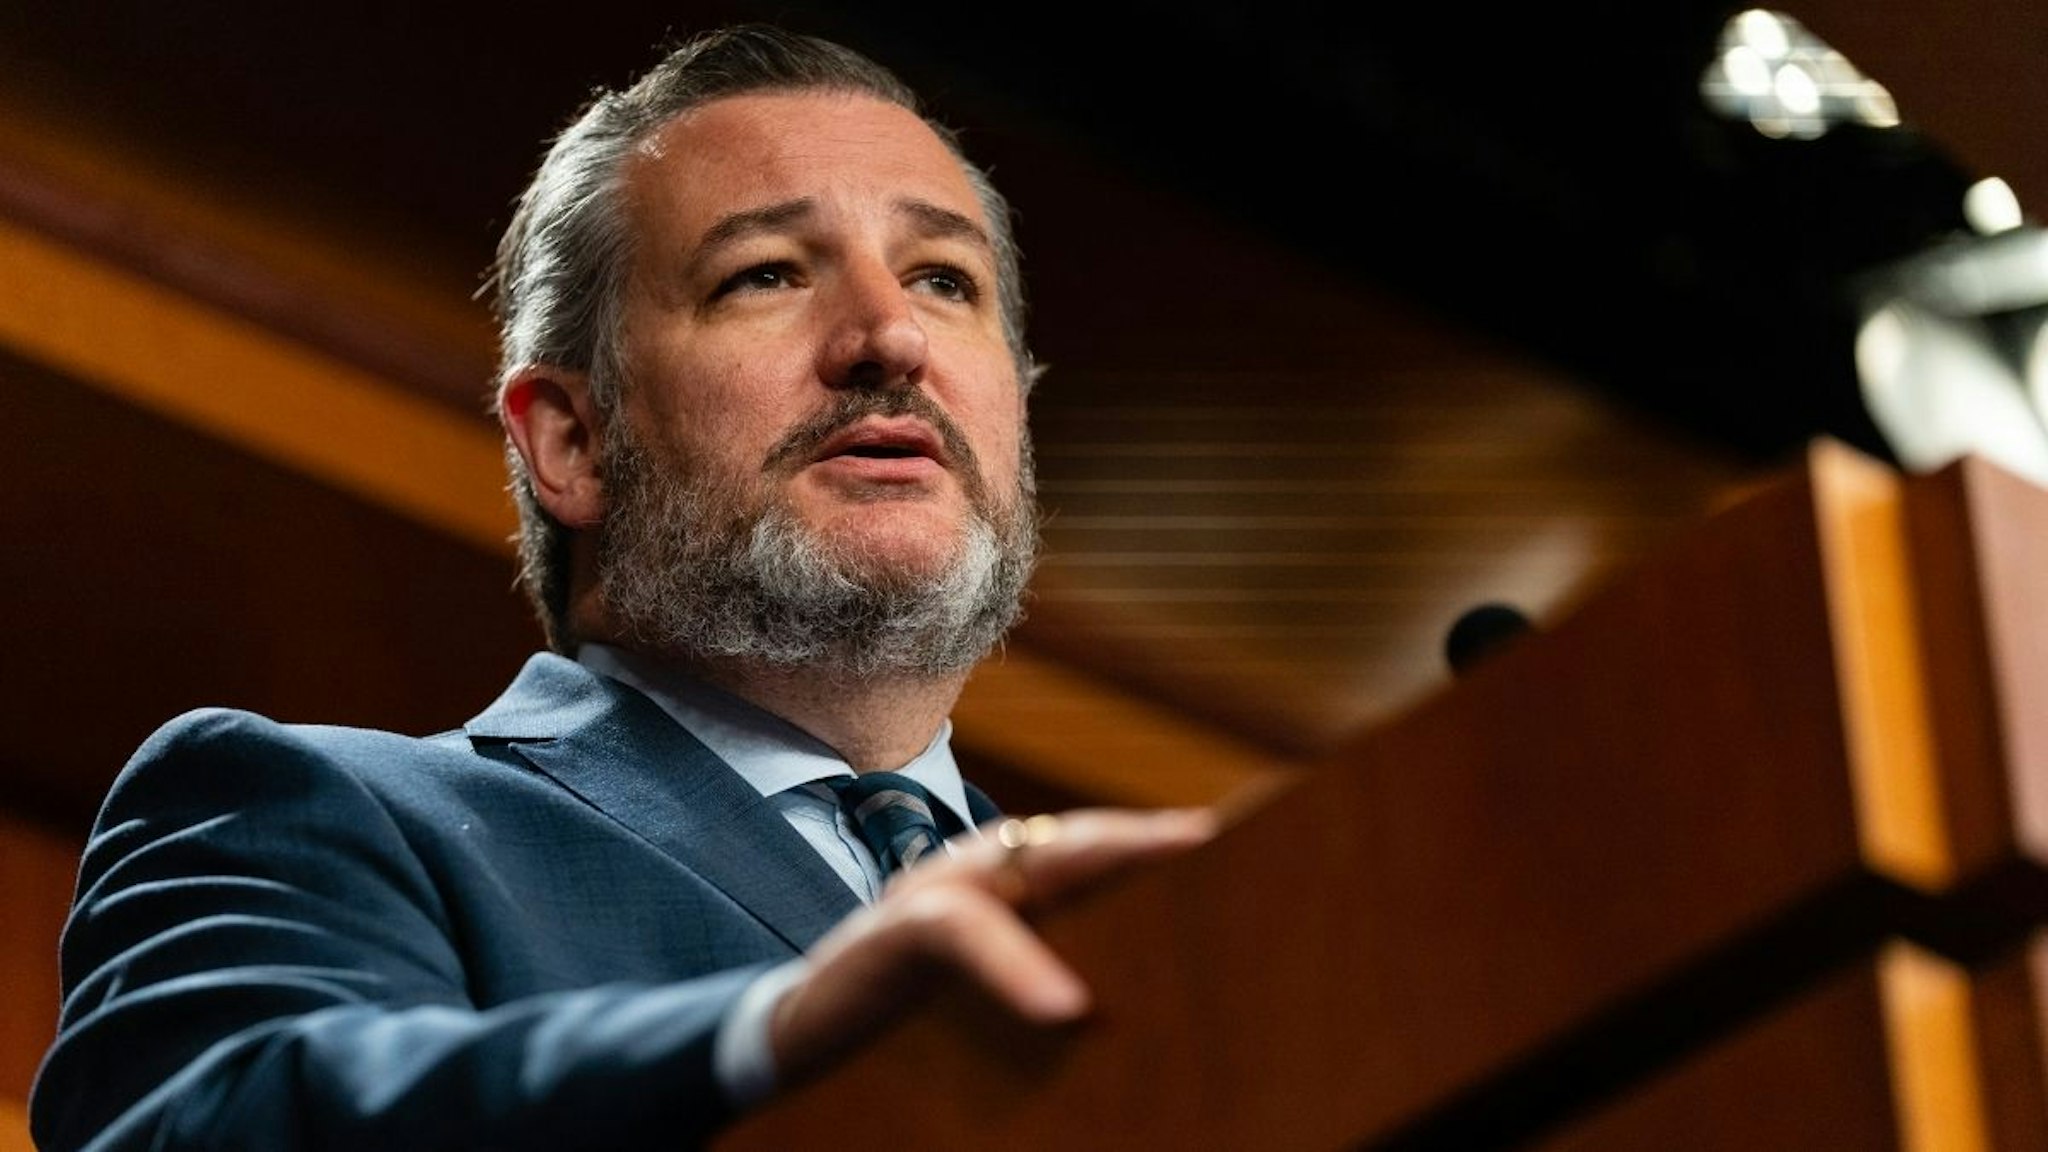 Senator Ted Cruz, a Republican from Texas, speaks during a news conference about the nomination of Ketanji Brown Jackson, associate justice of the U.S. Supreme Court nominee for U.S. President Joe Biden, at the U.S. Capitol in Washington, D.C., U.S., on Thursday, April 7, 2022.